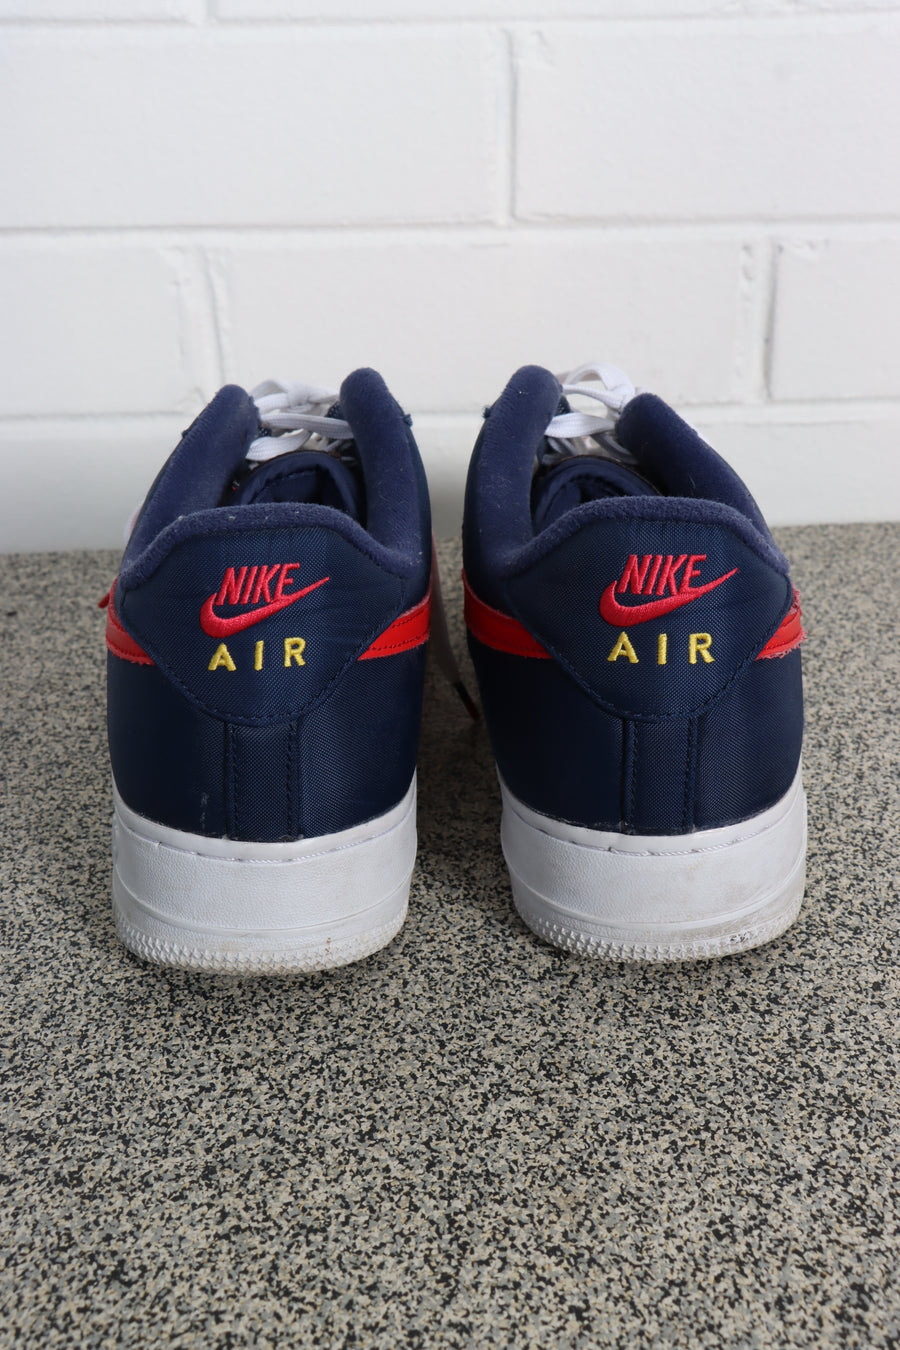 NIKE Air Force 1 Low LV8 GS 'Independence Day' Sneakers (12)